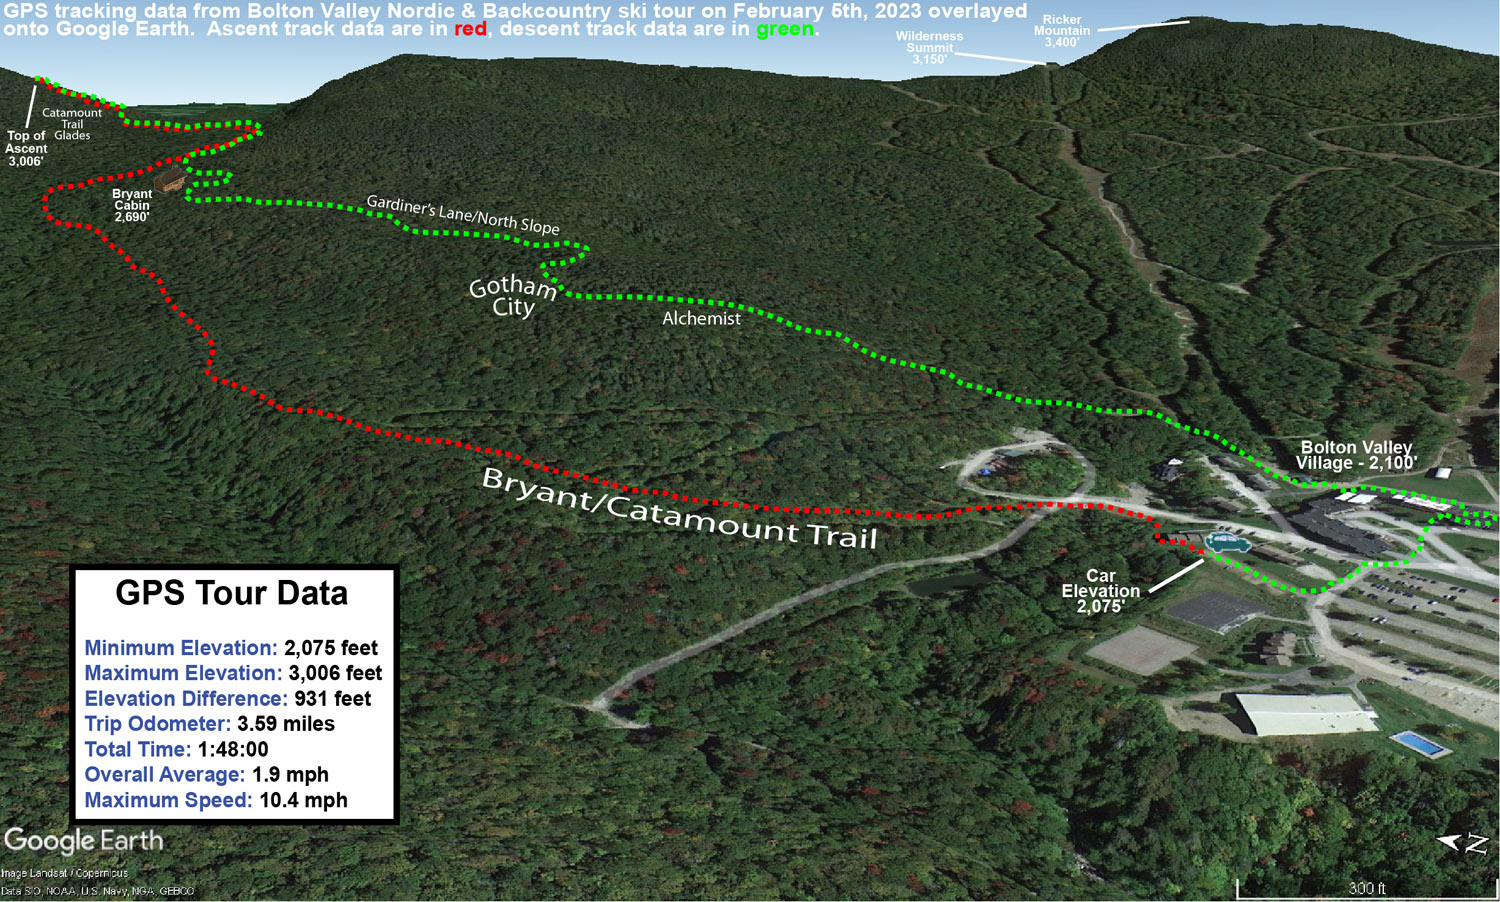 A Google Earth map showing GPS tracking data from a ski tour on February 5th, 2023 at Bolton Valley Ski Resort in Vermont